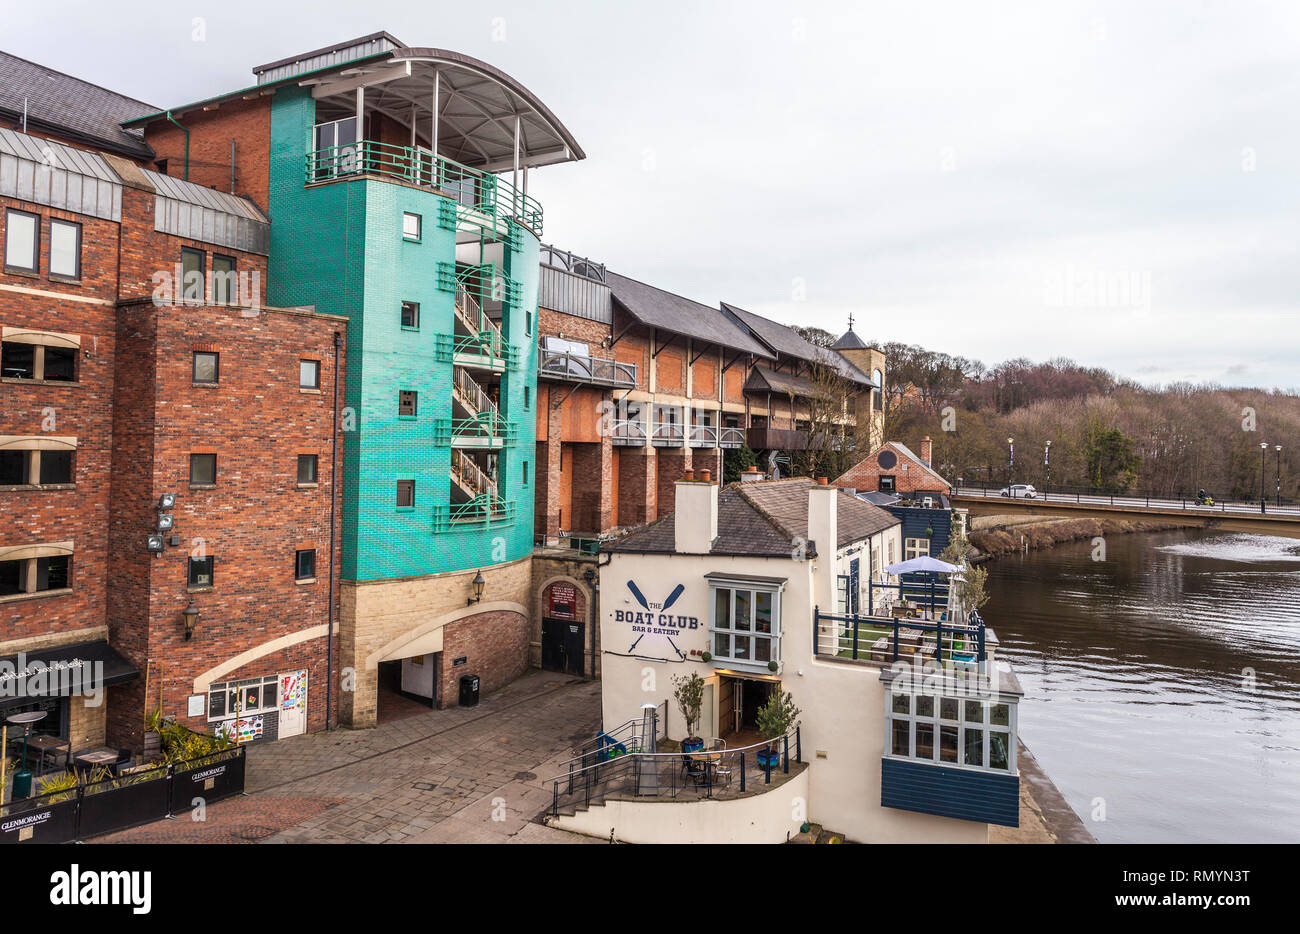 The Boat Club and shops on the riverside at Durham,England,UK Stock Photo